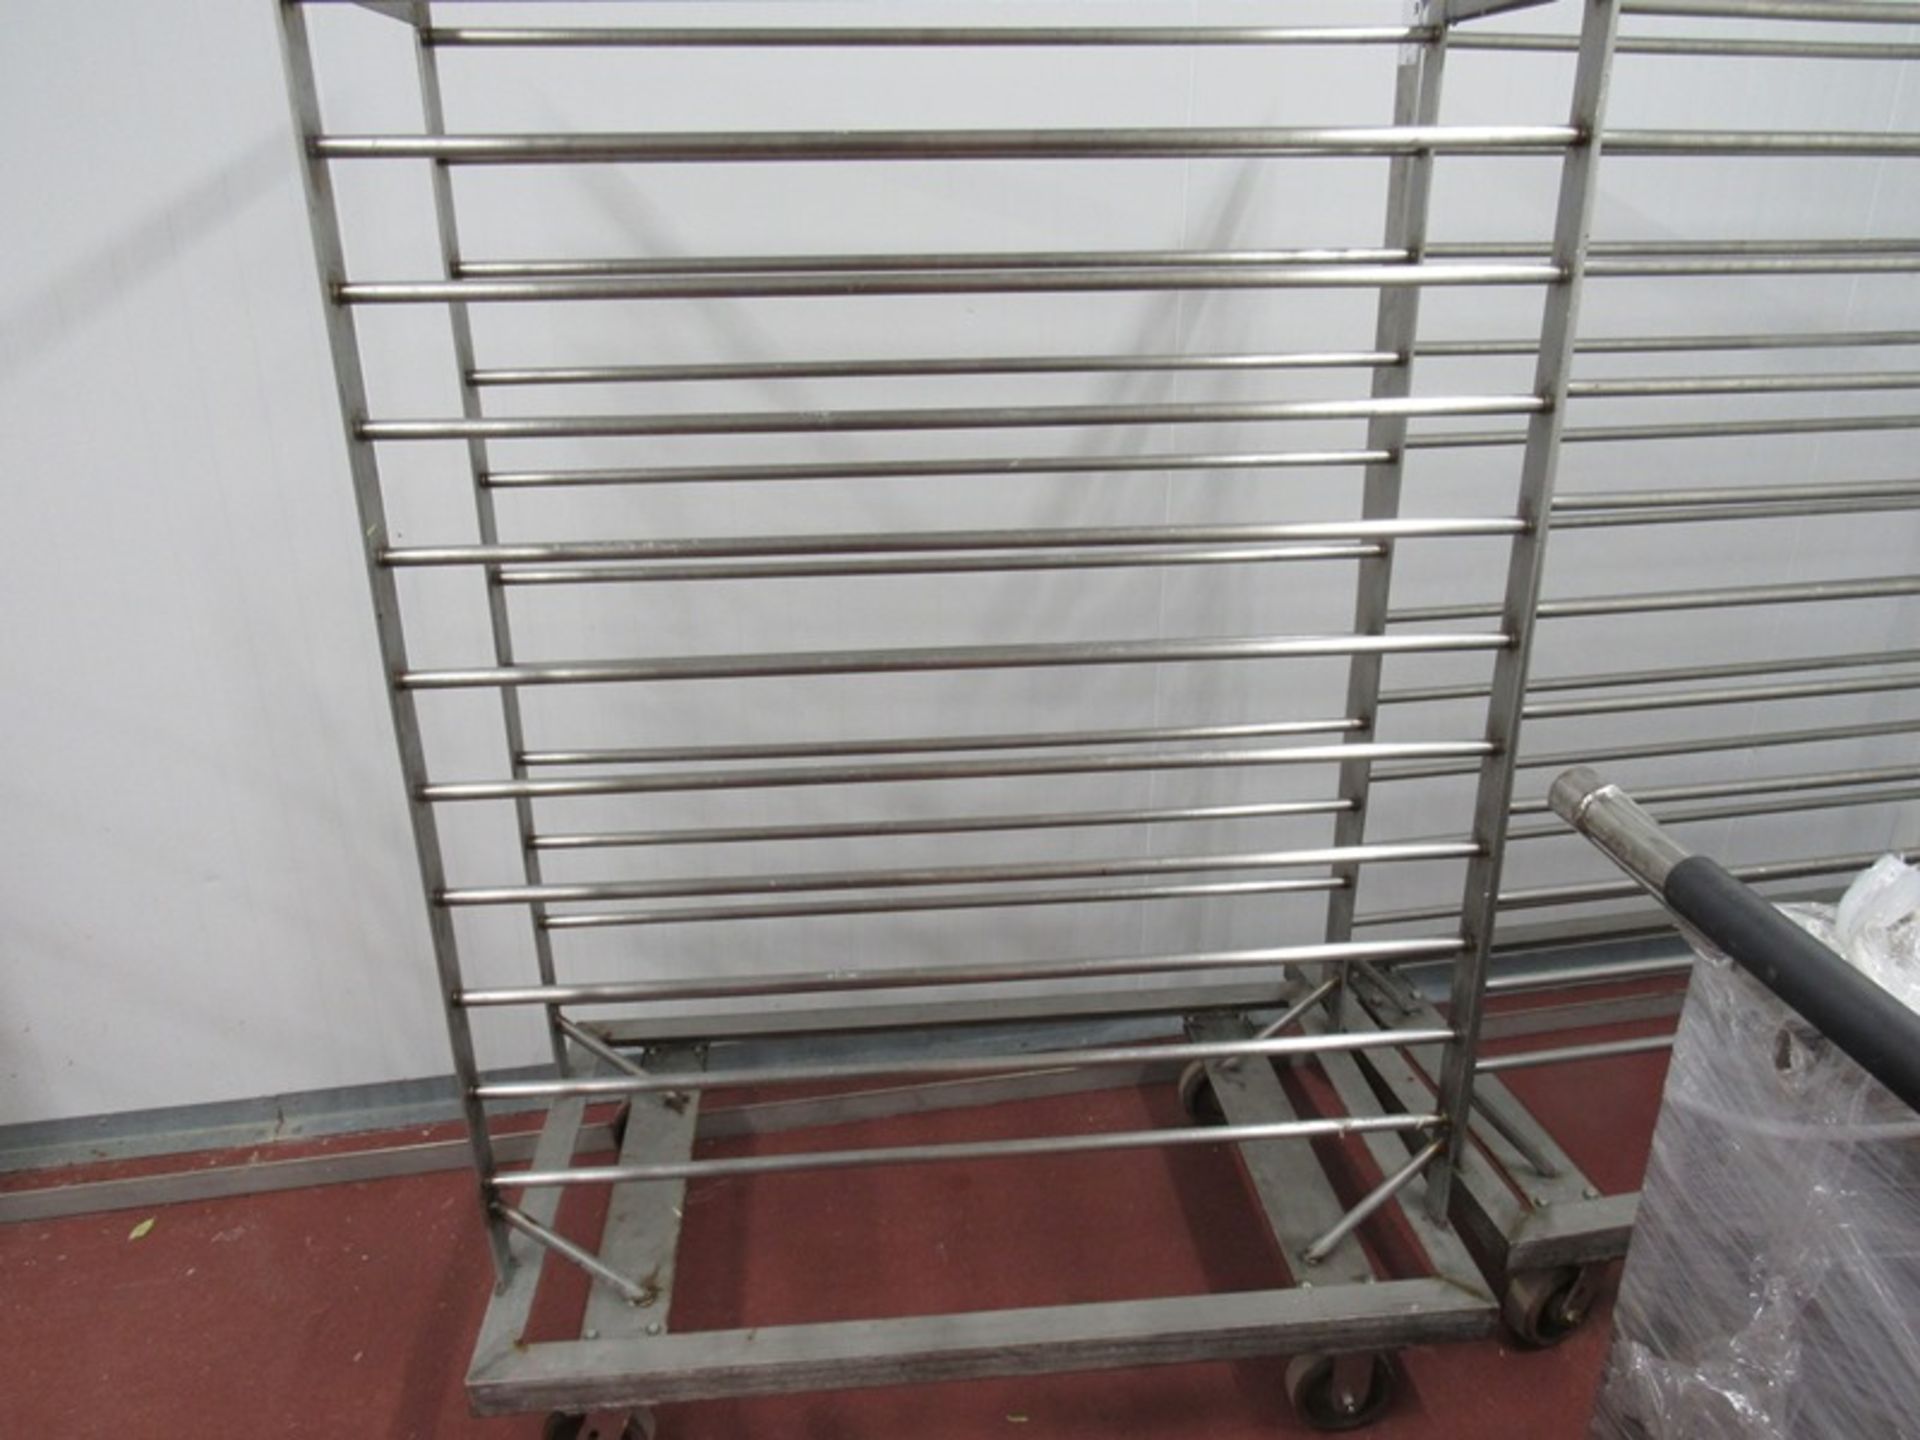 Stainless Steel Portable Racks, 27 1/2" W X 46" L X 65" Tall, 11 spaces, 4" apart (Required